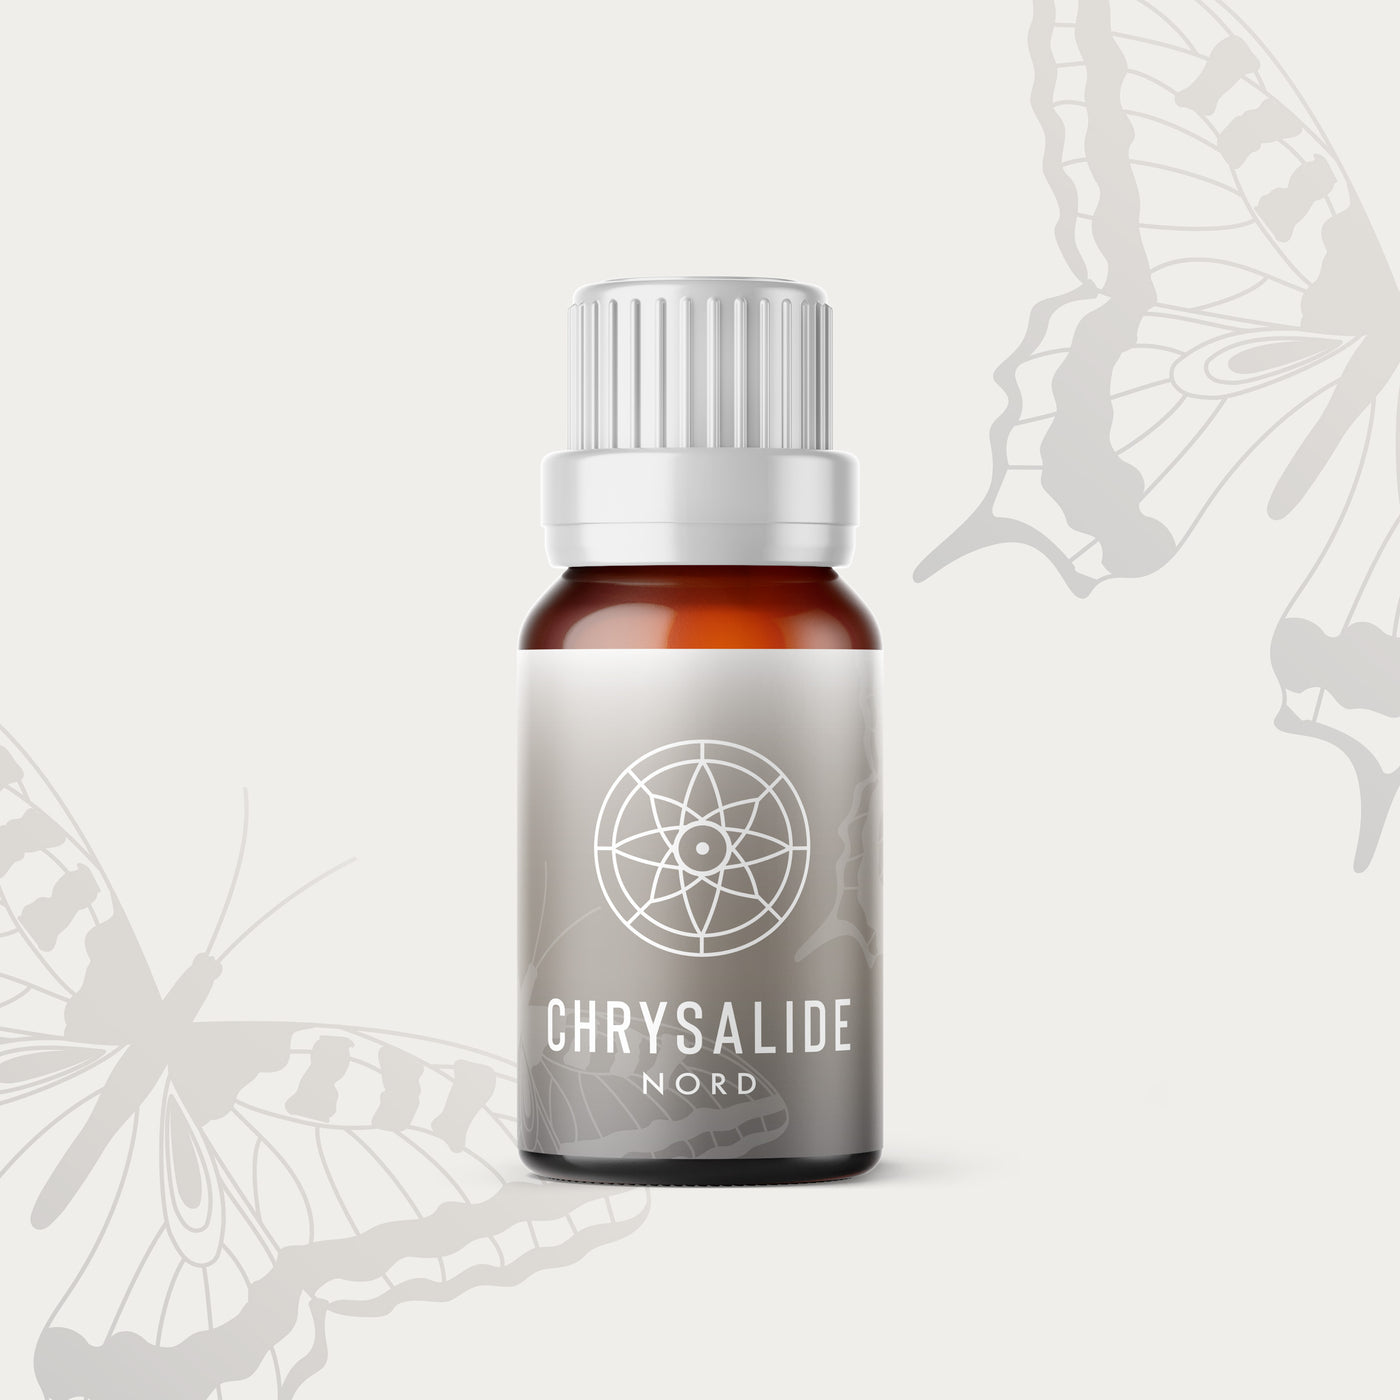 Chrysalide - Synergie aromatique 100% pure